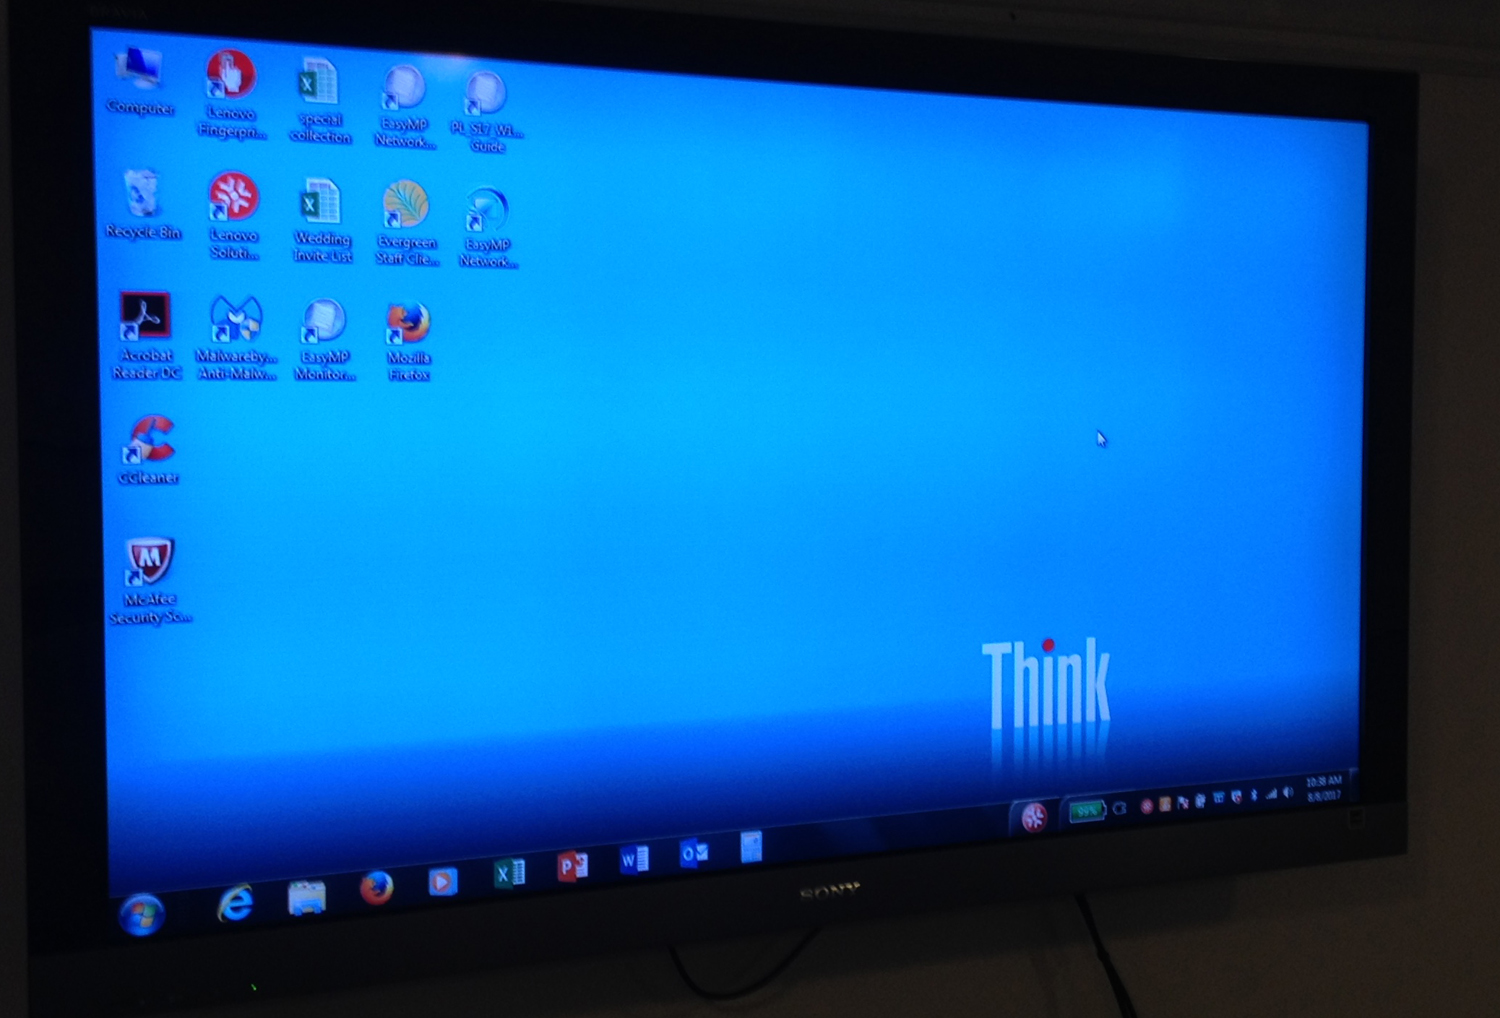 LARGE-SCREEN MONITOR IN MEETING ROOM